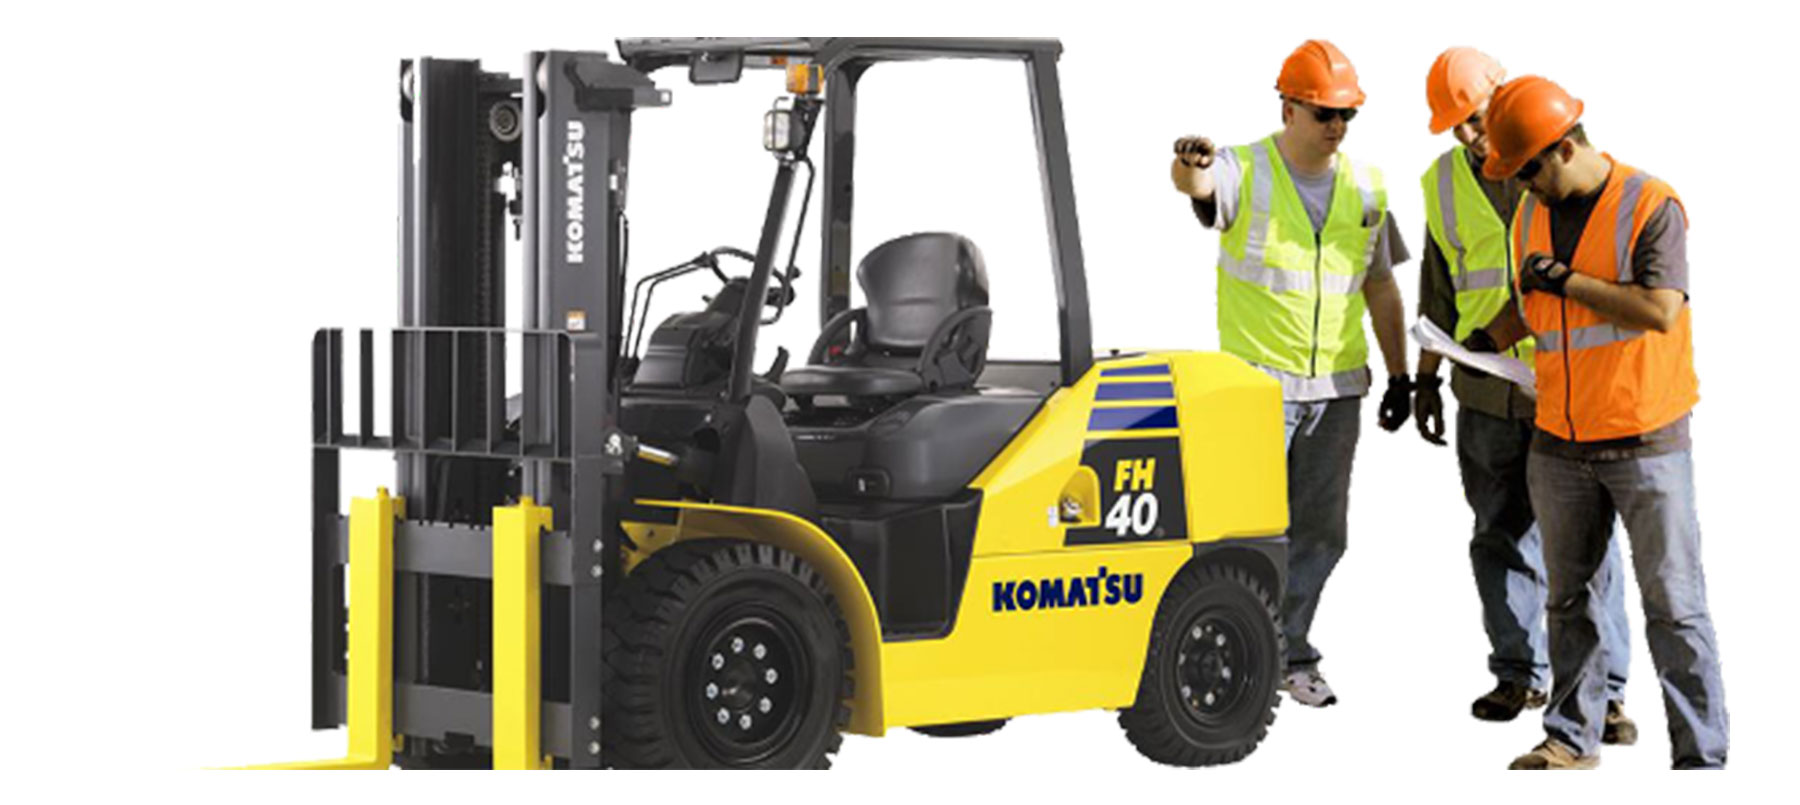 Working on a Forklift